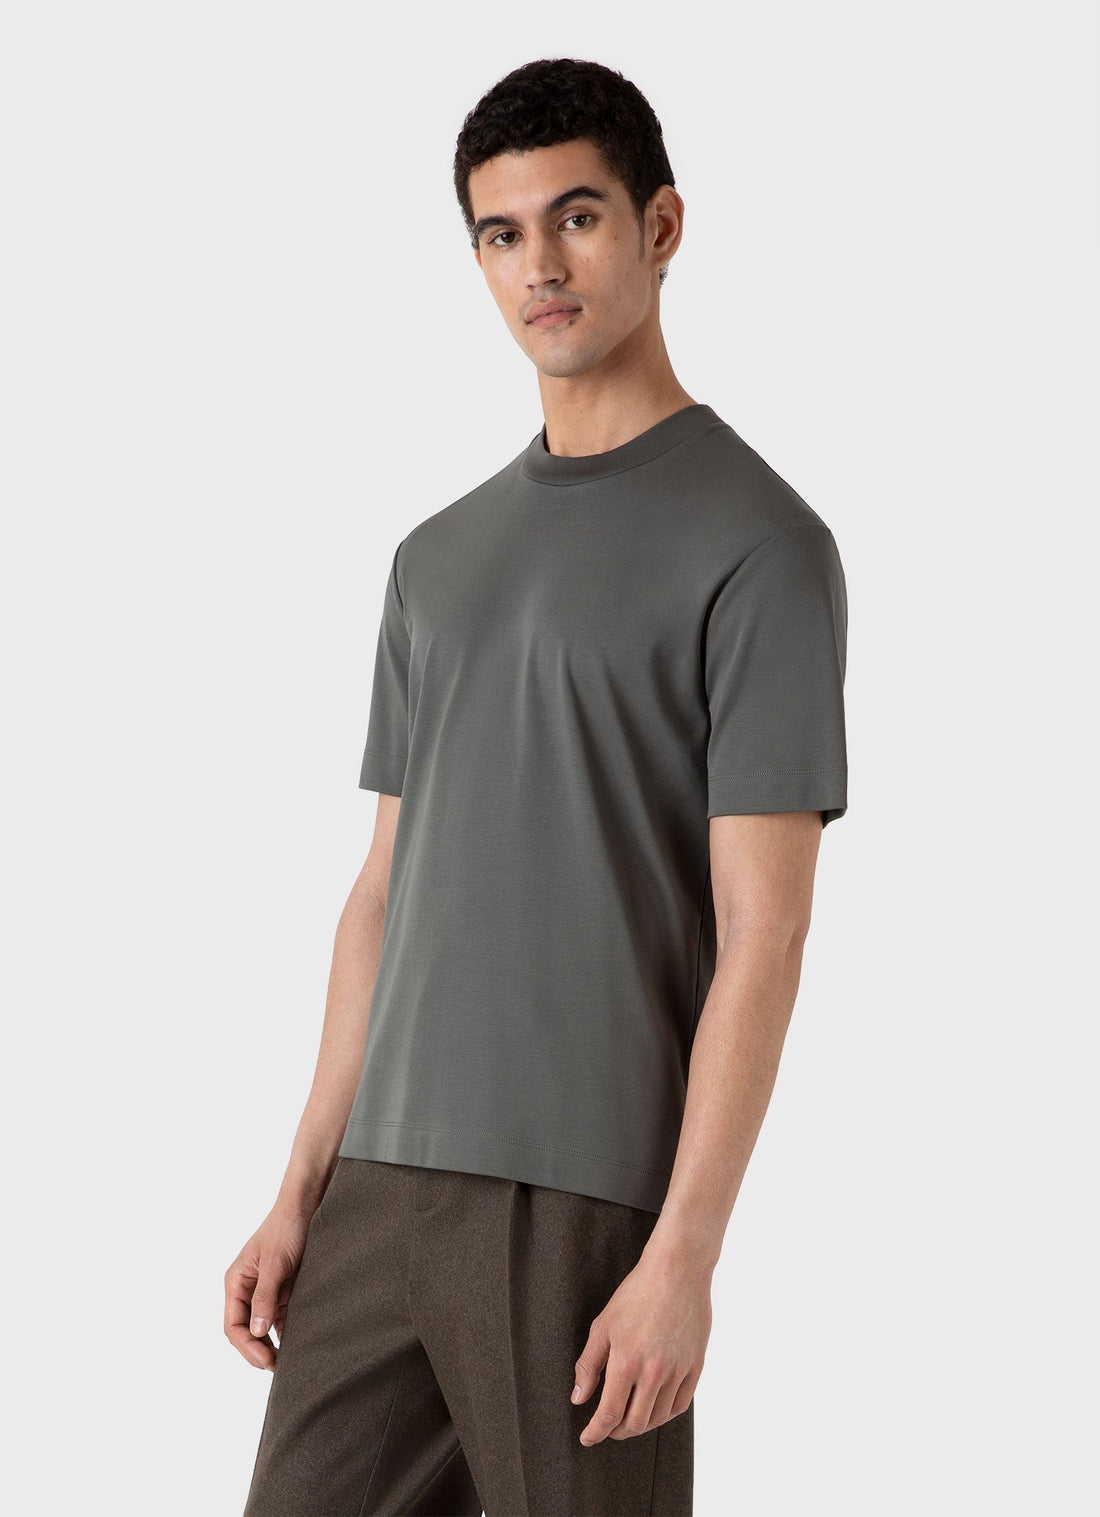 Men's Relaxed Fit Heavyweight T-shirt in Drill Green